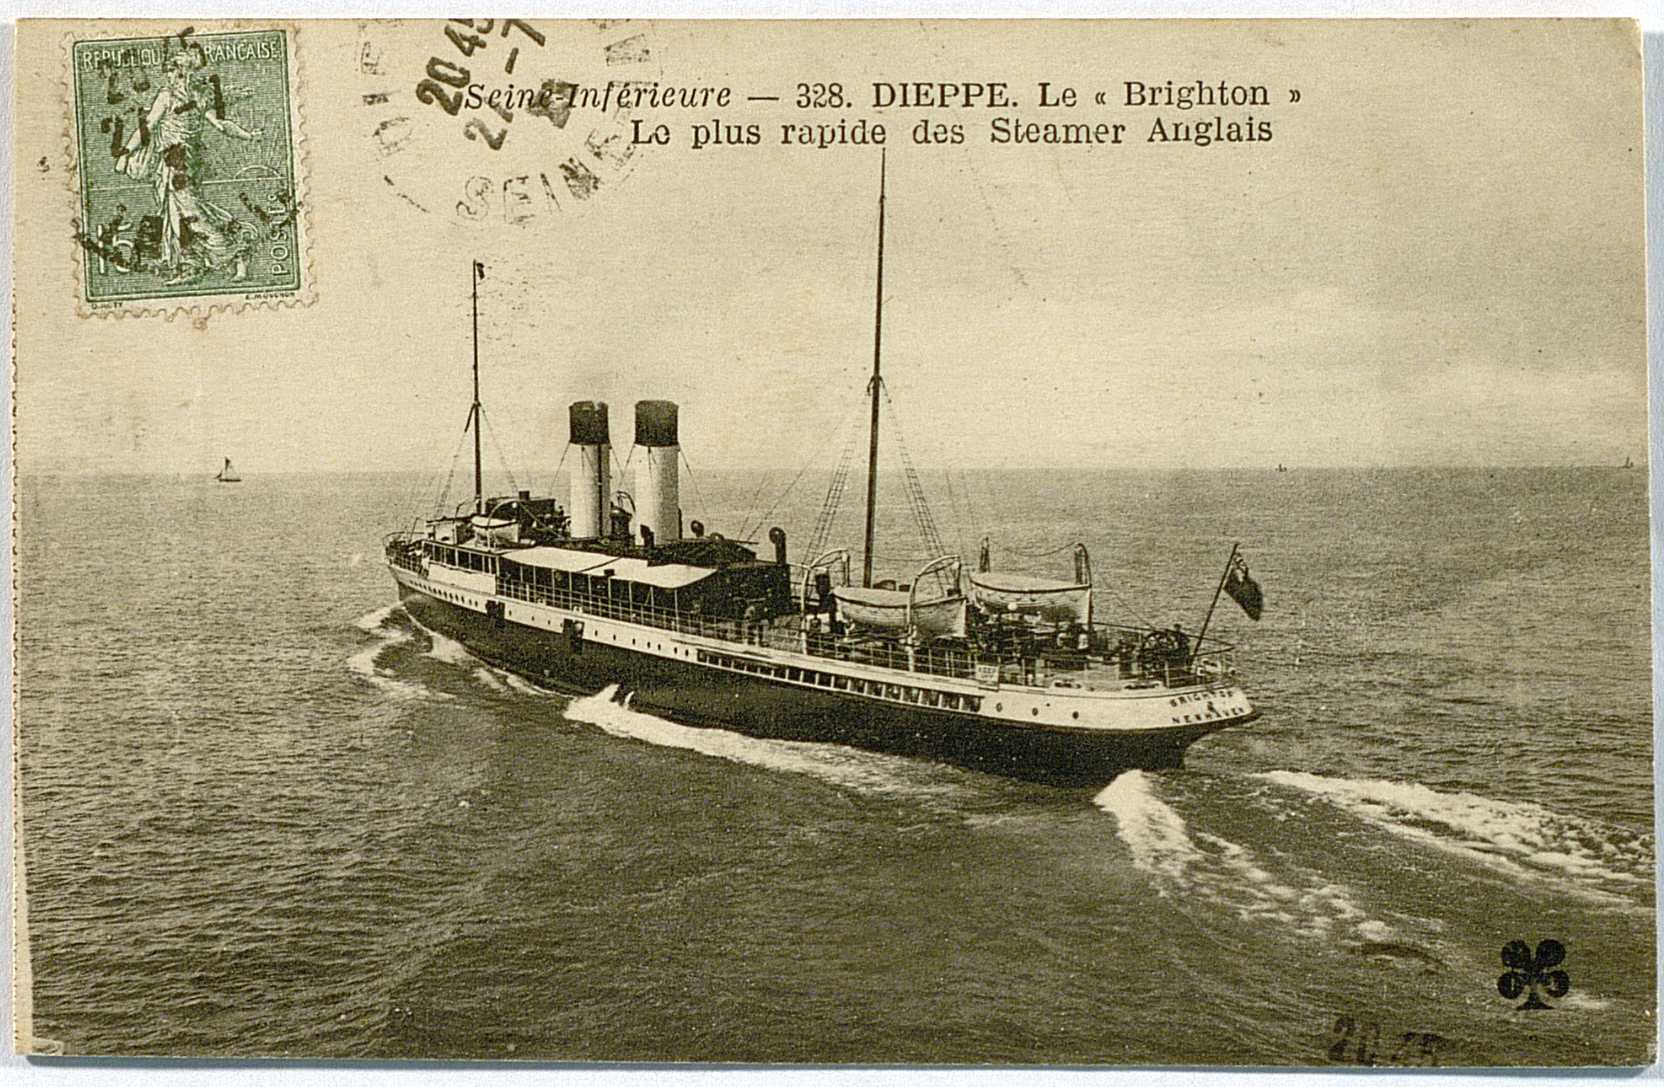 Dieppe, the Brighton, the fastest of the English steamers, postcard